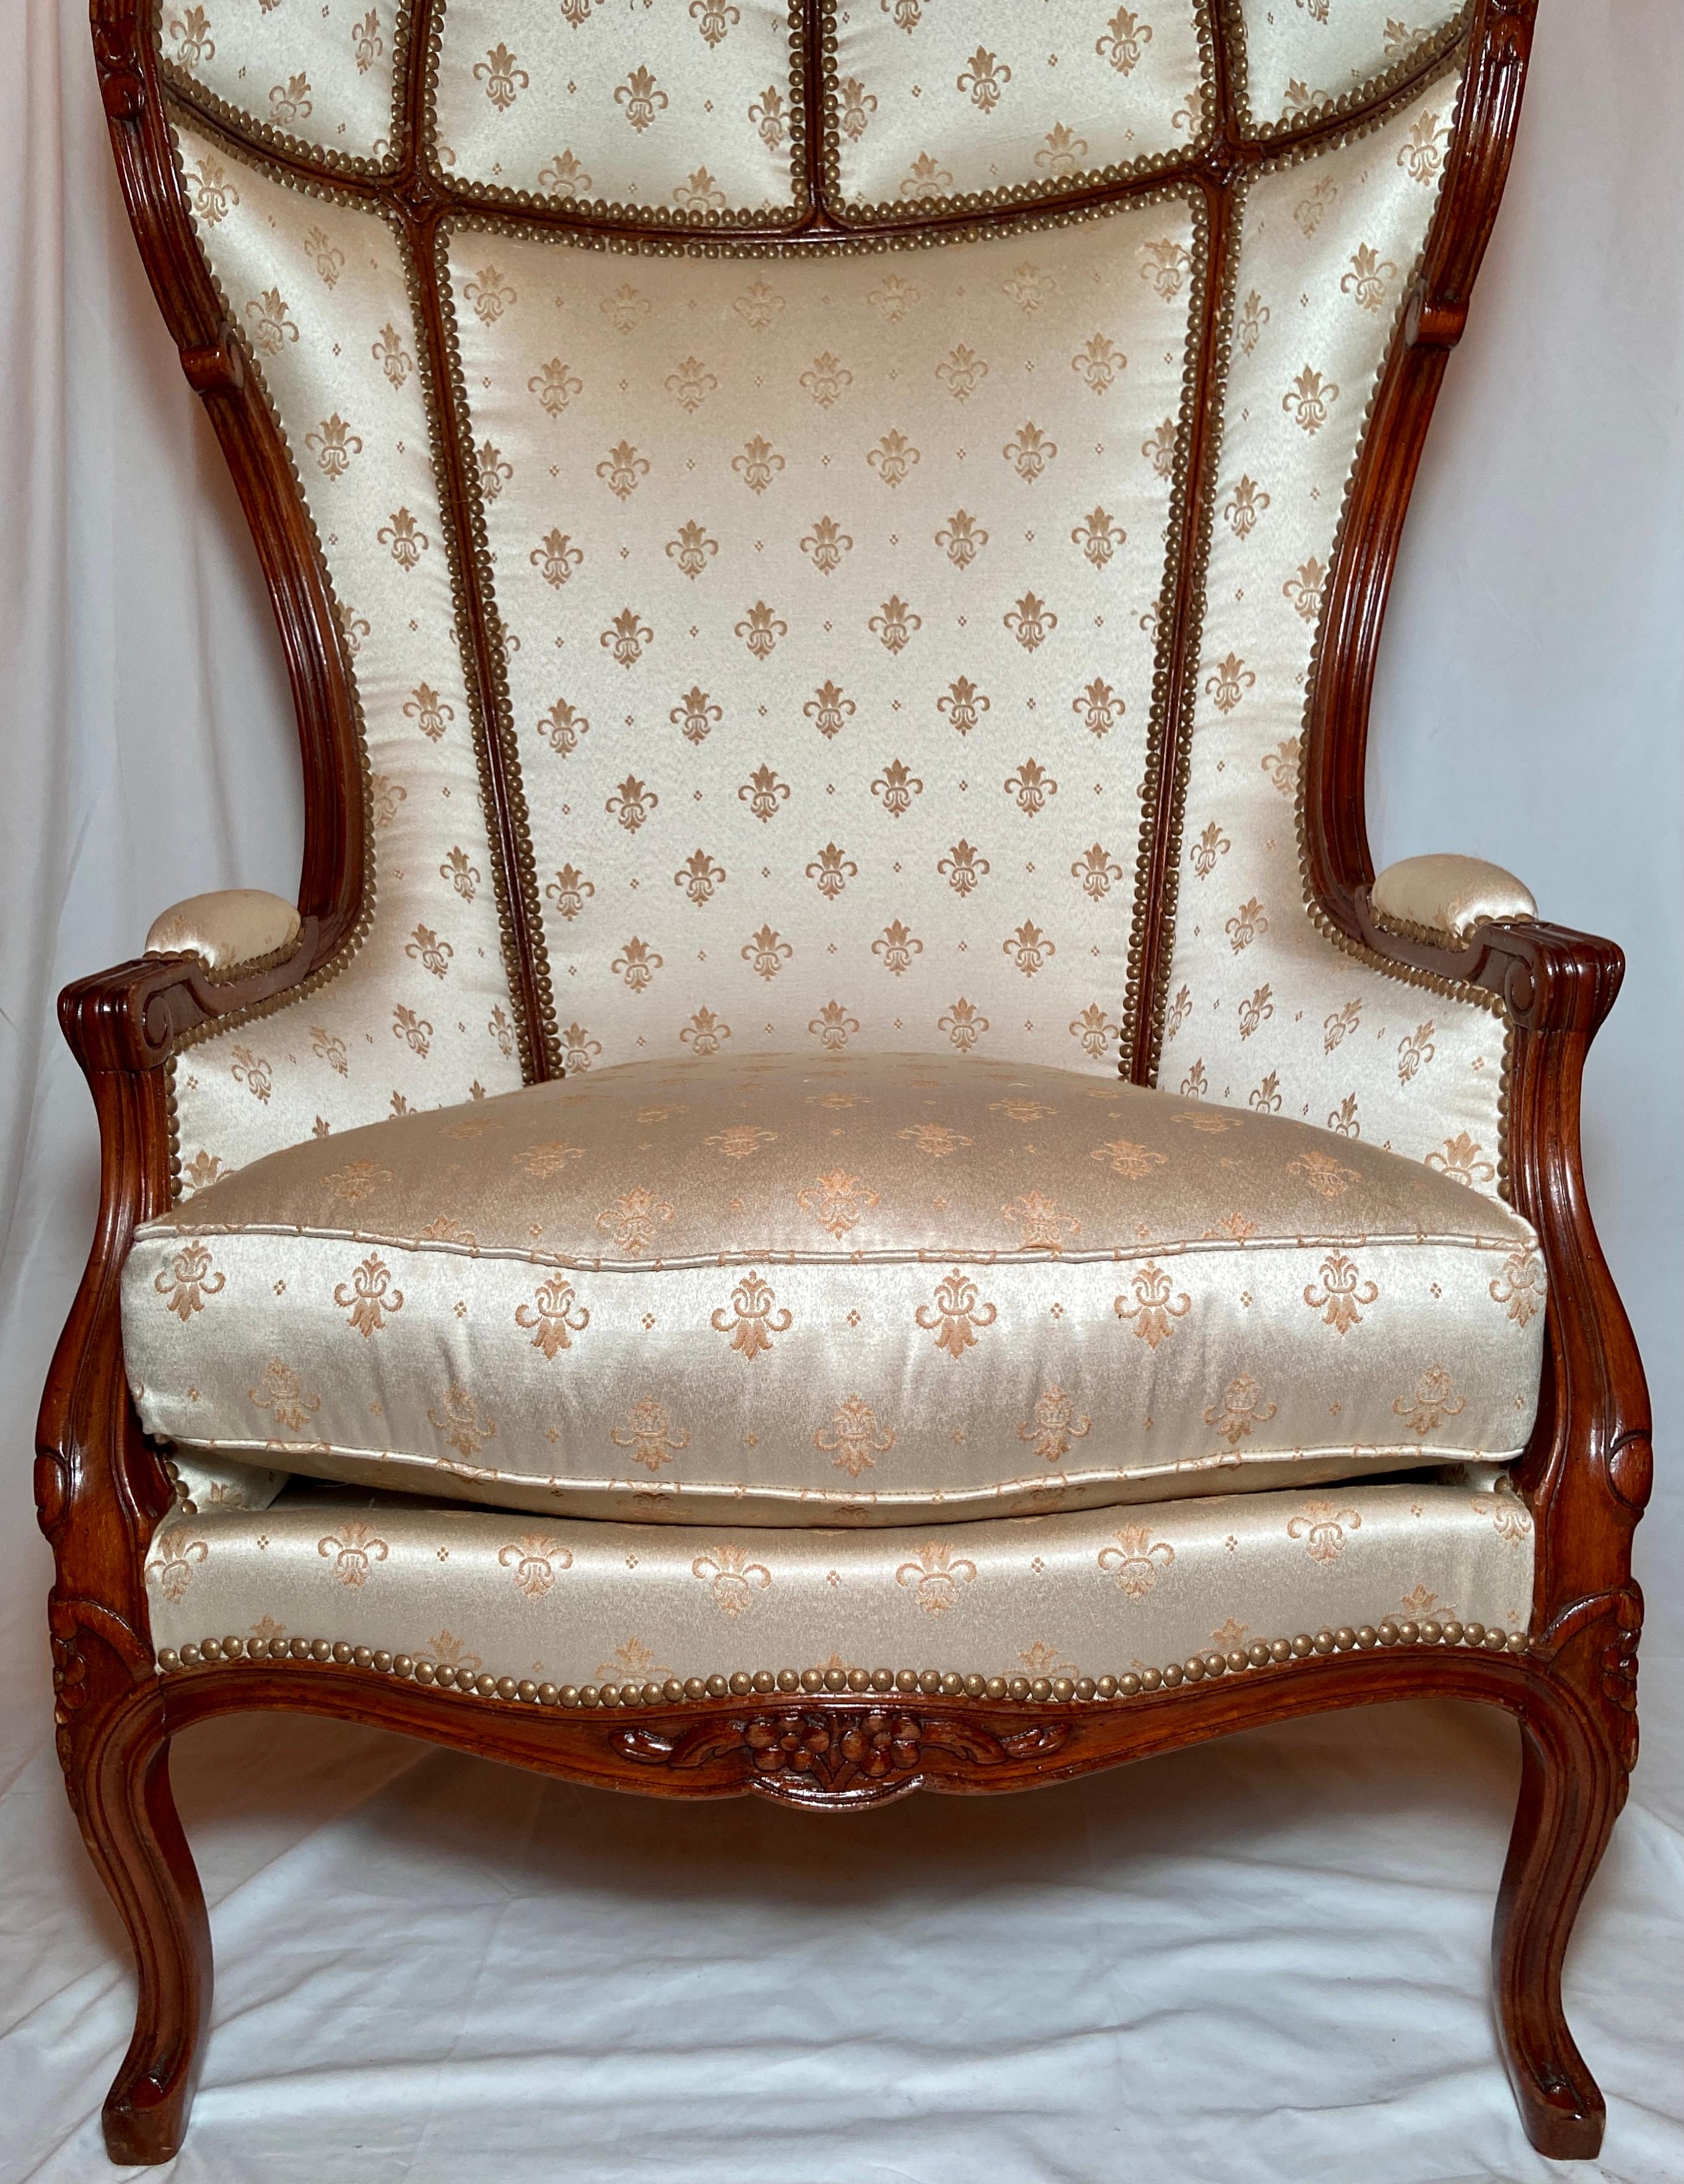 Pair Estate French walnut ivory & gold Fleur-de-Lis upholstered balloon canopy porters chairs with grommet details. Circa 1940's.
These chairs are in excellent condition, very comfortable and nicely upholstered.